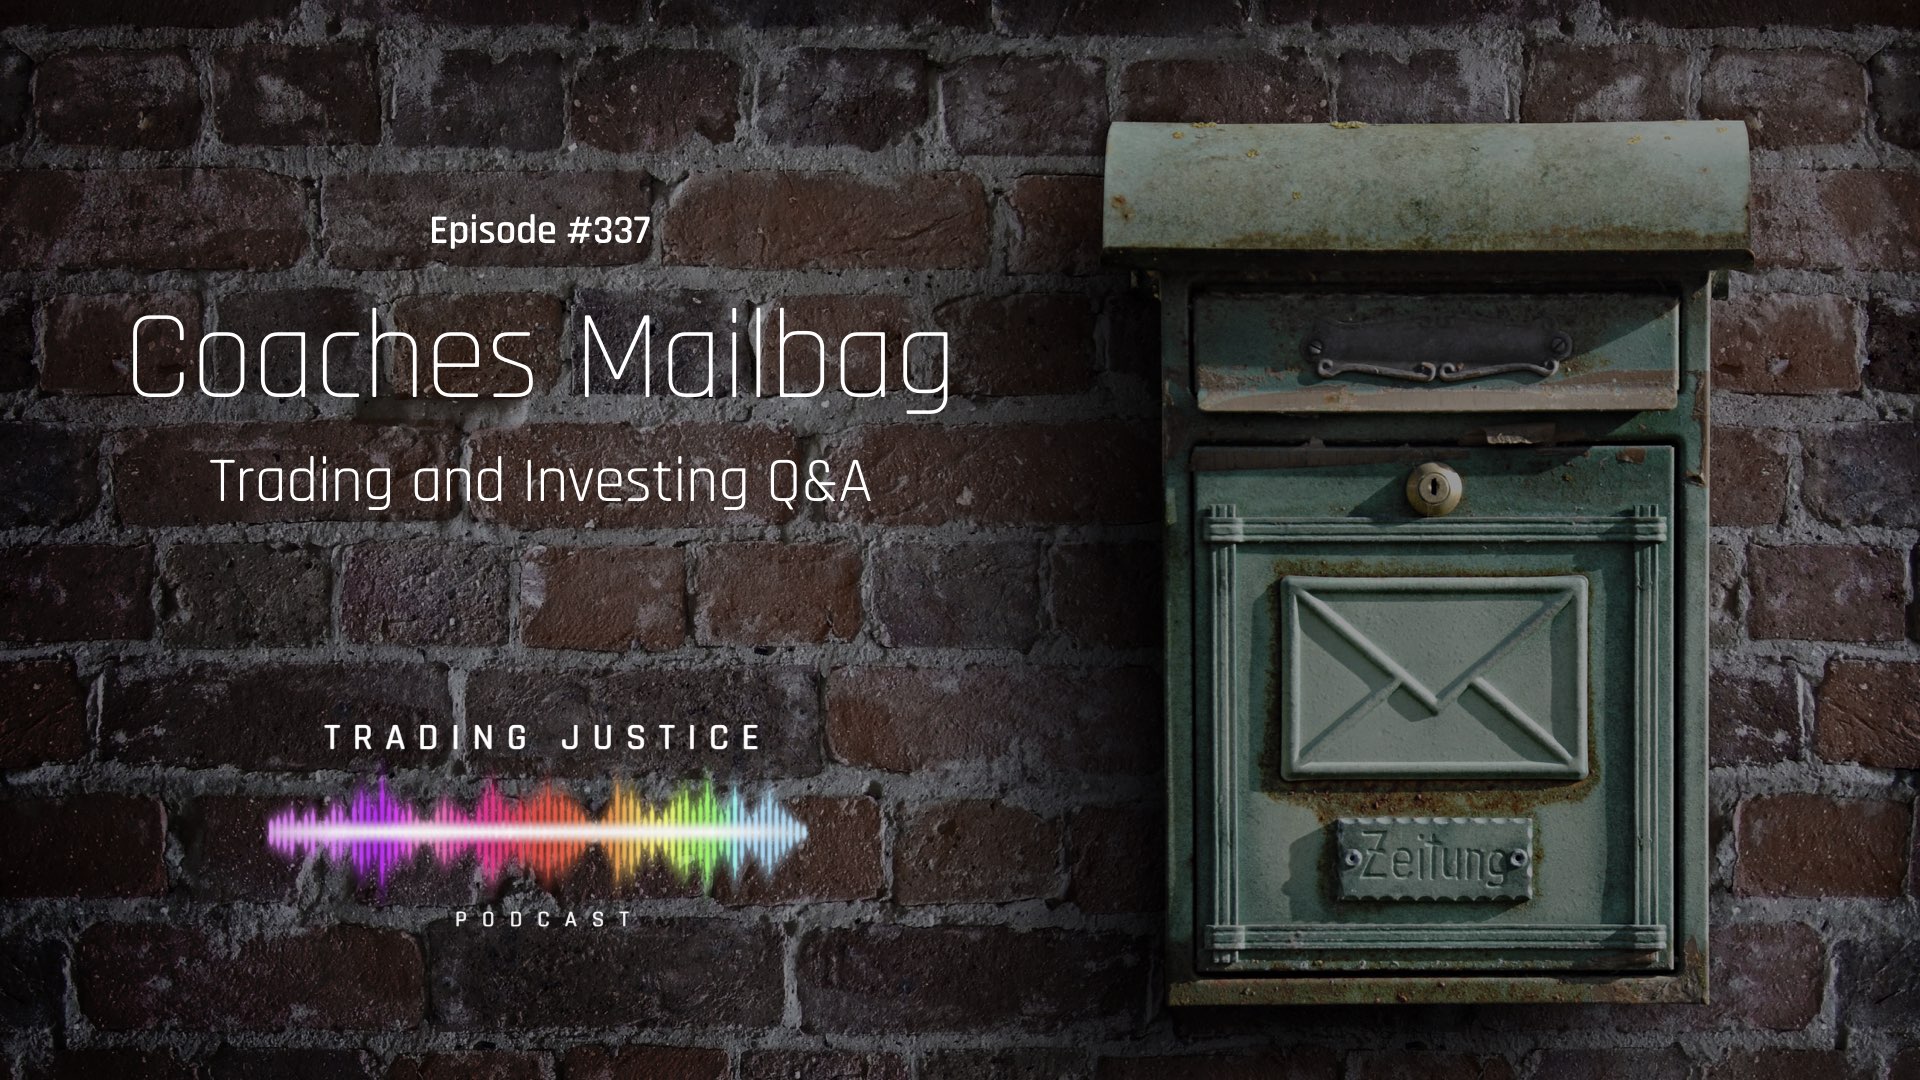 Episode 337: Coaches Mailbag - Trading and Investing Q&A | Trading Justice Podcast